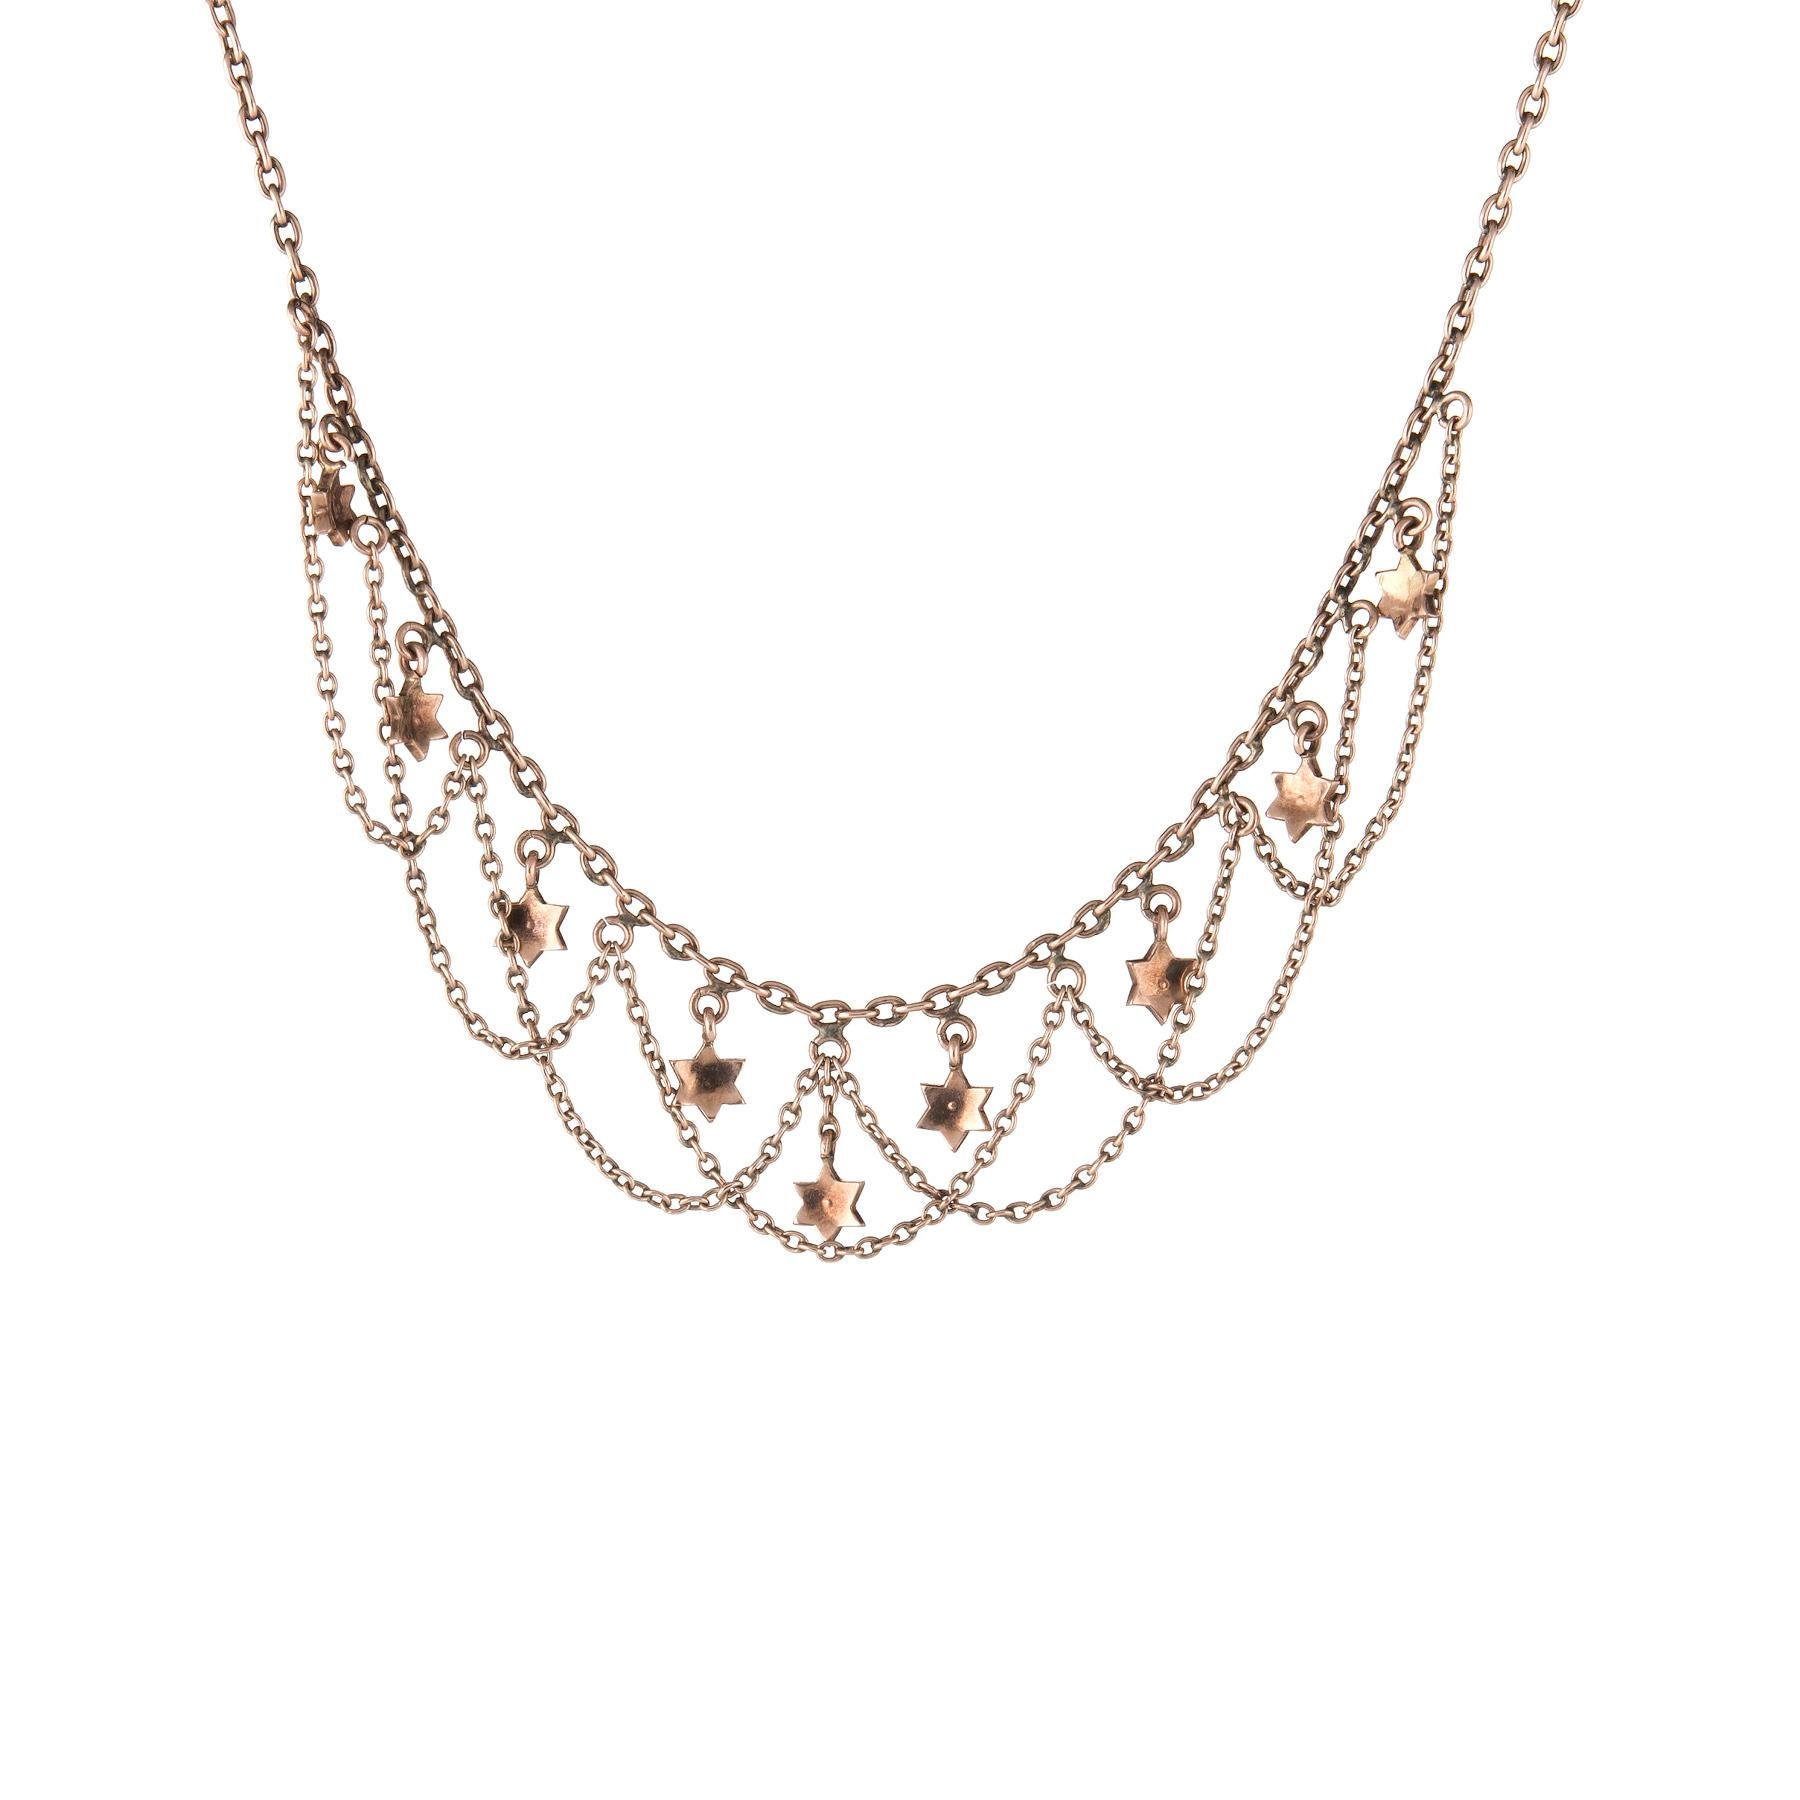 Elegant and finely detailed Art Deco era necklace (circa 1920s to 1930s), crafted in 10 karat rose gold.  

9 seed pearls are each set into the stars (approx. 1mm). 

The necklace measures 15 inches in length and sits nicely at the nape of the